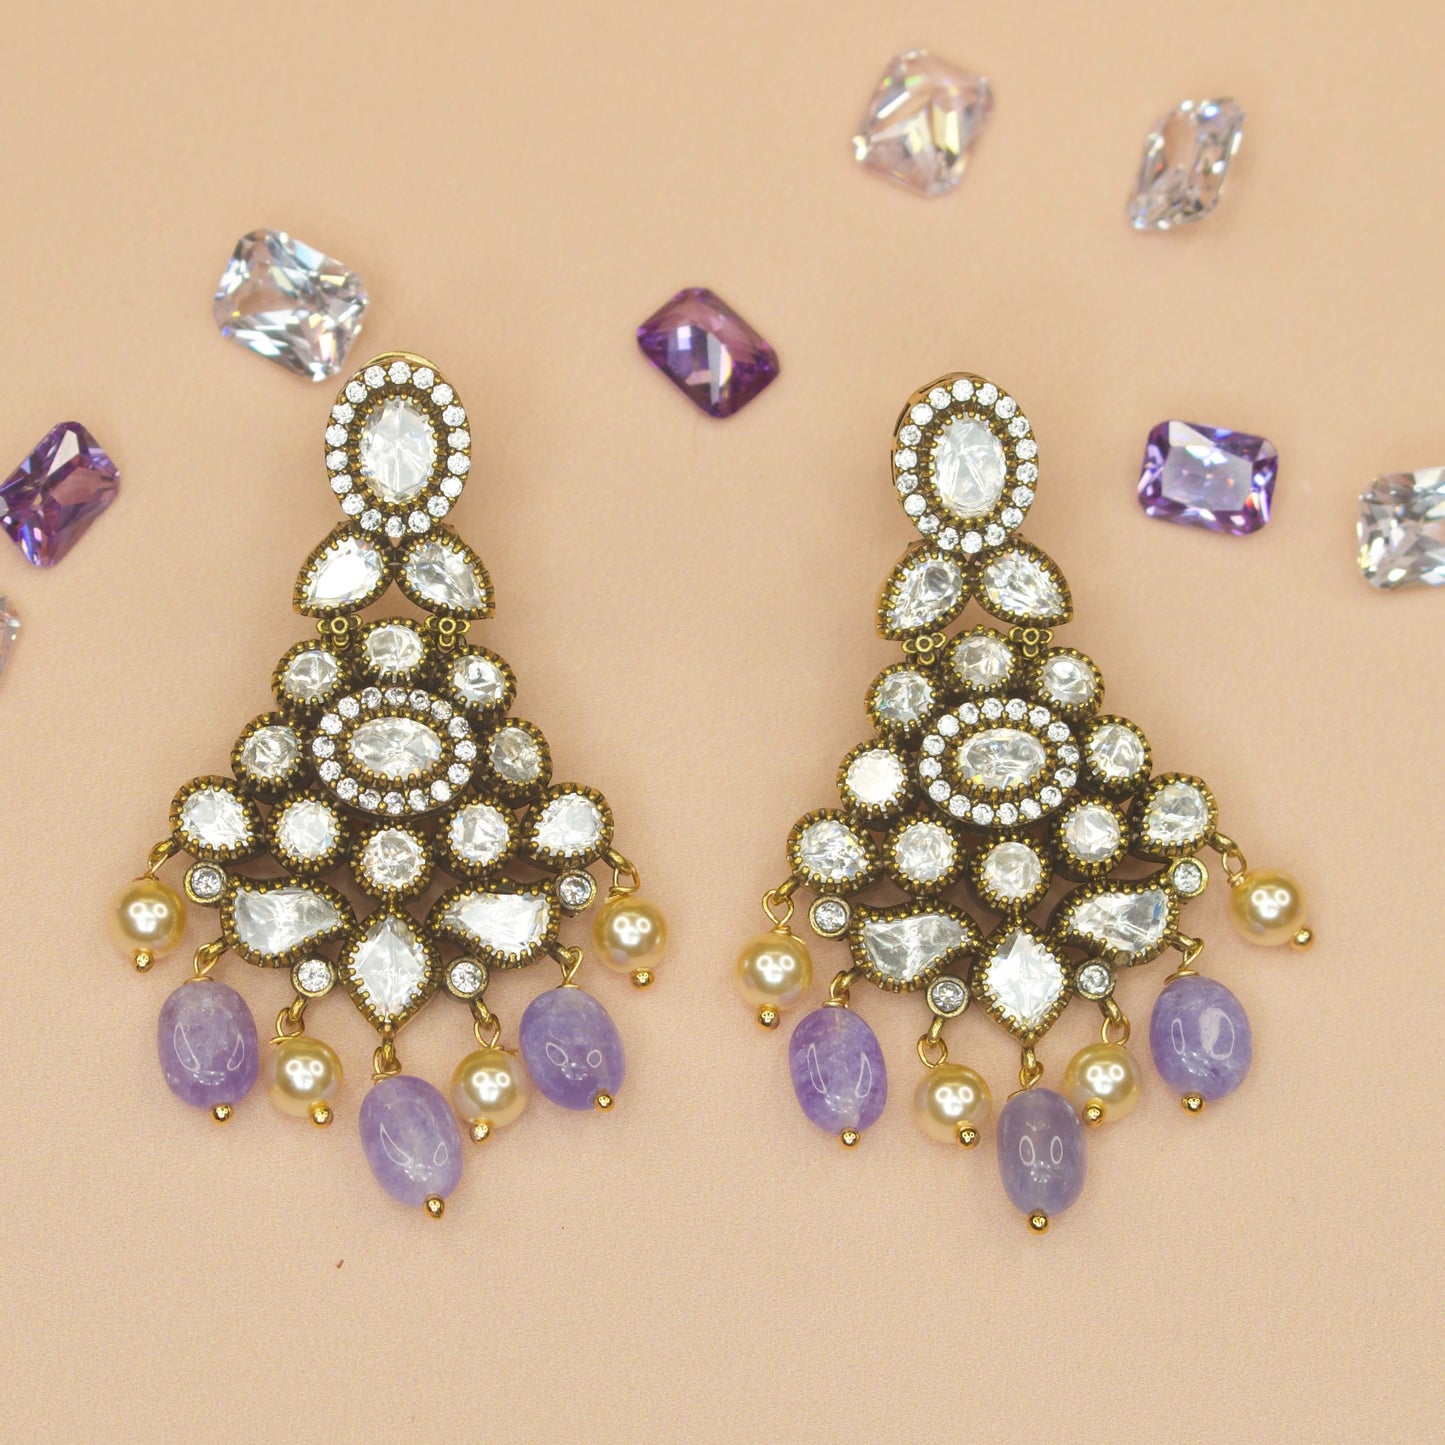 Polki Victorian Earrings with Pearls